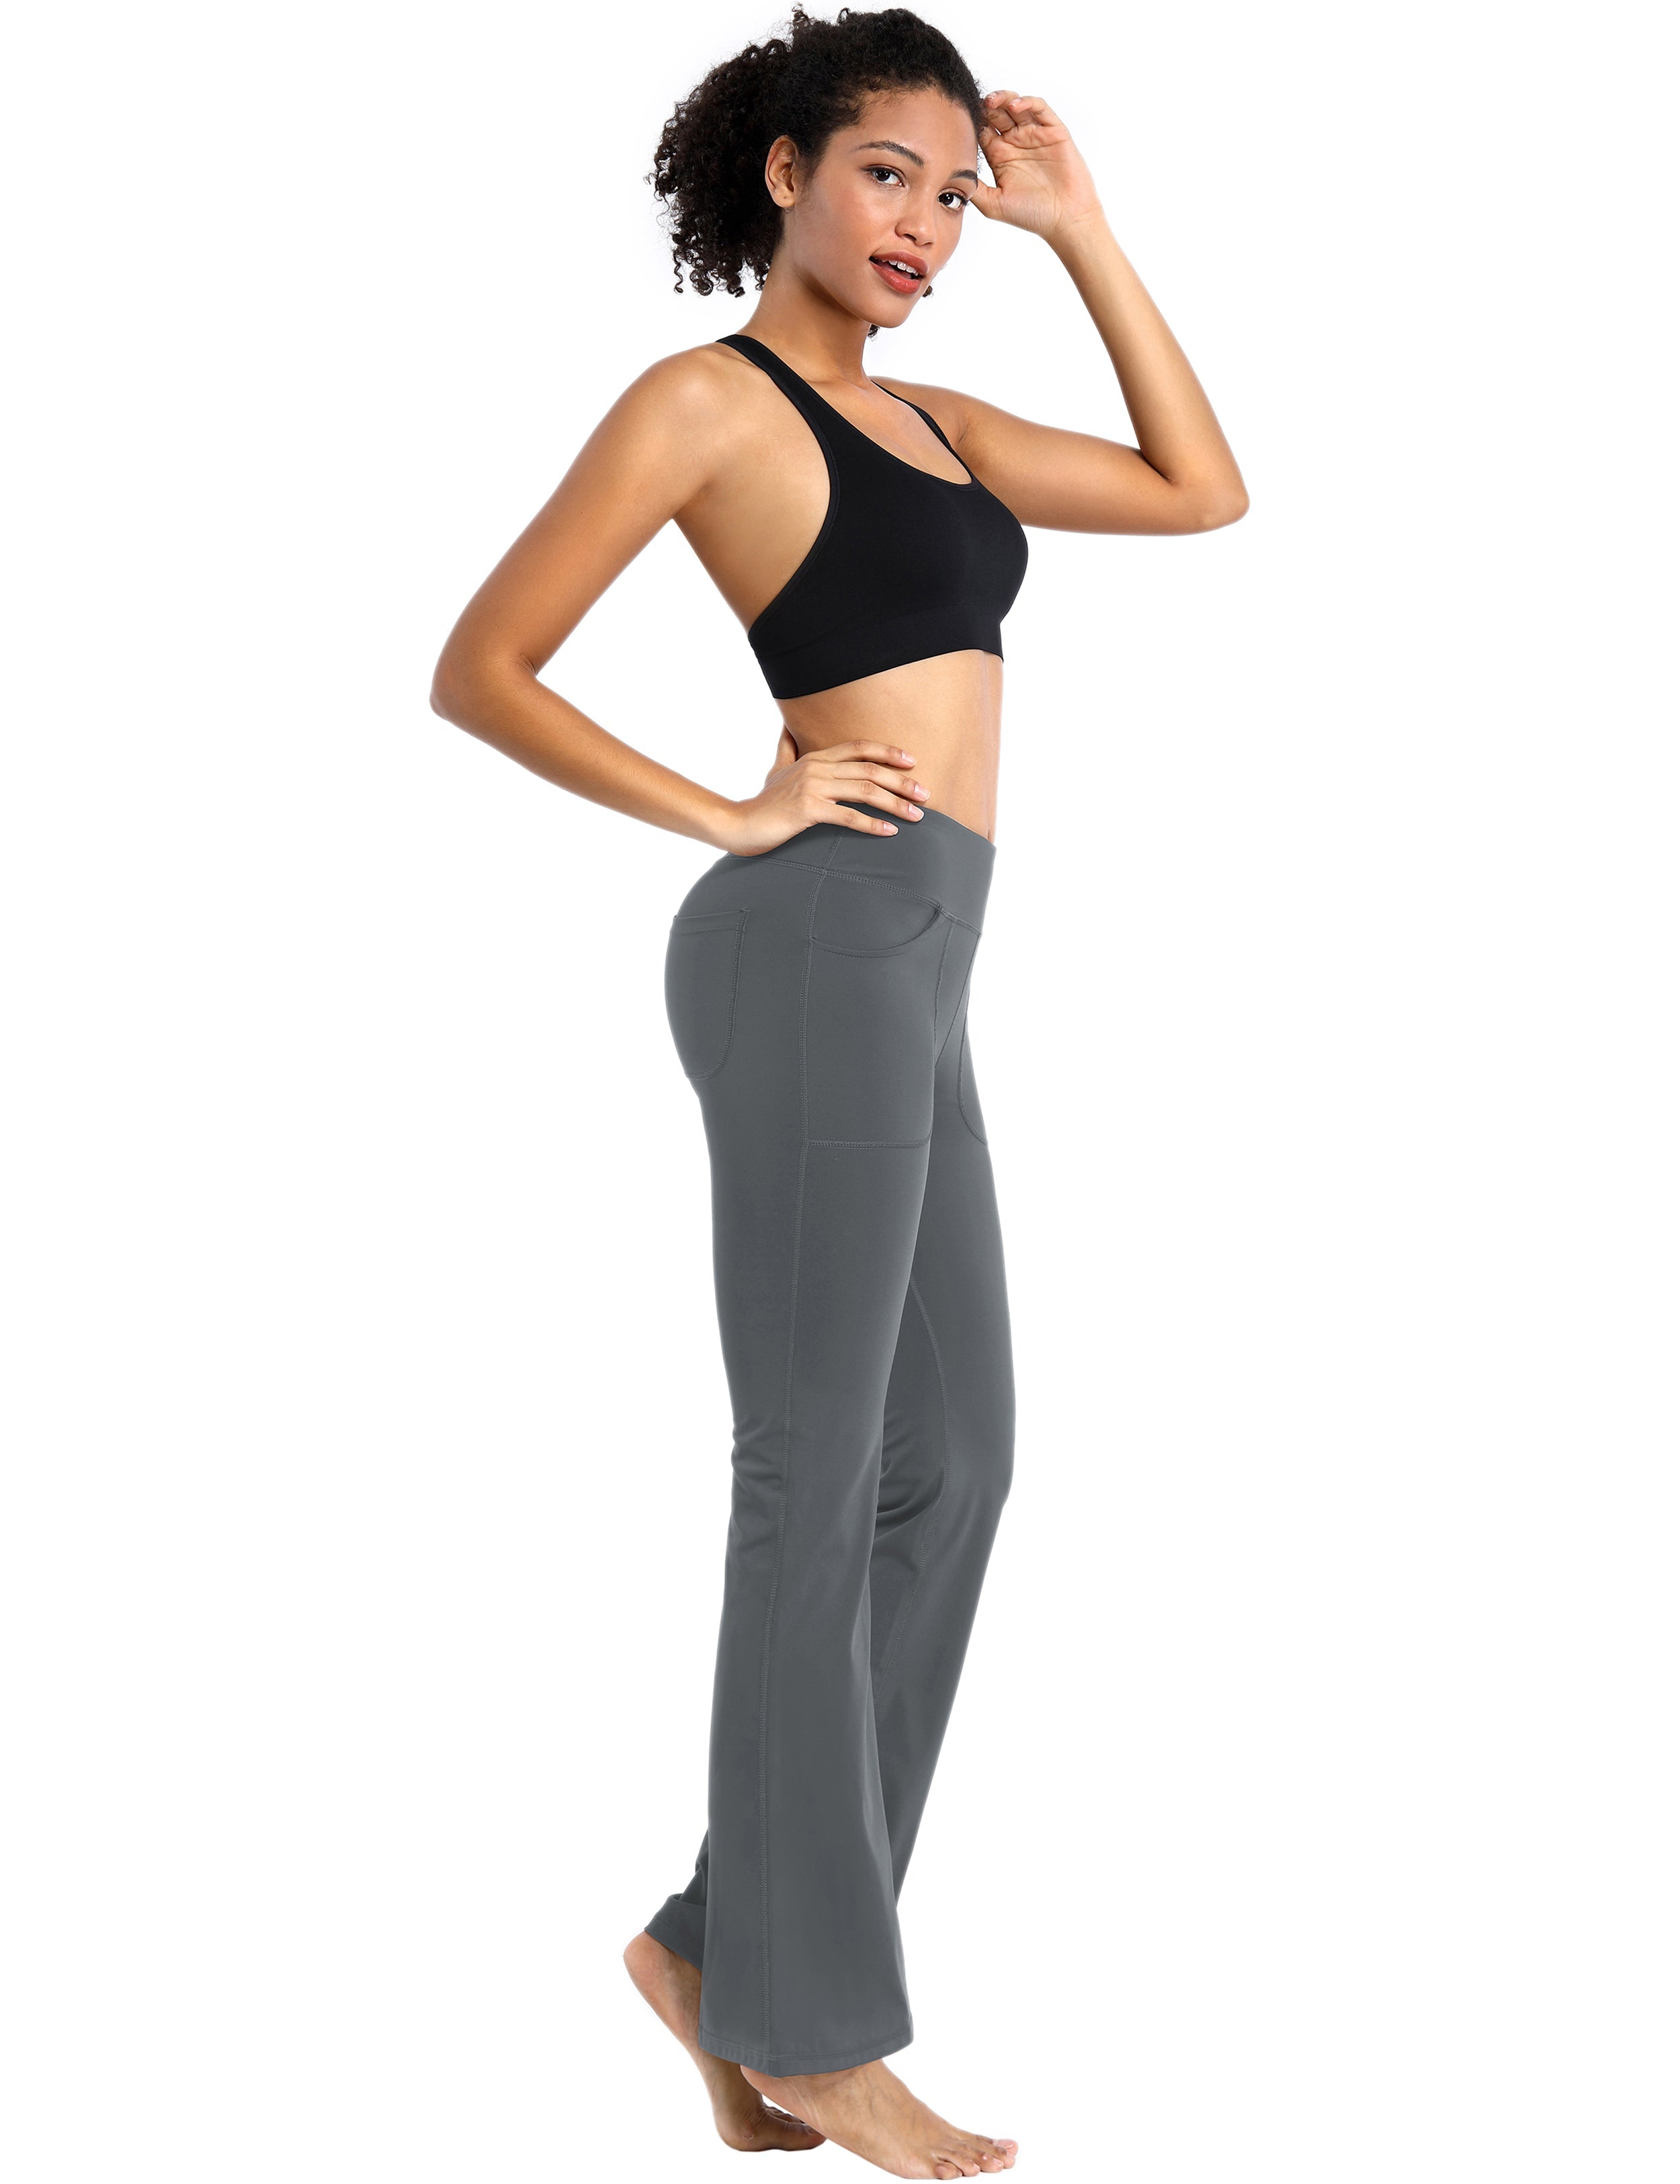 4 Pockets Bootcut Leggings shadowcharcoal 75%Nylon/25%Spandex Fabric doesn't attract lint easily 4-way stretch No see-through Moisture-wicking Inner pocket Four lengths